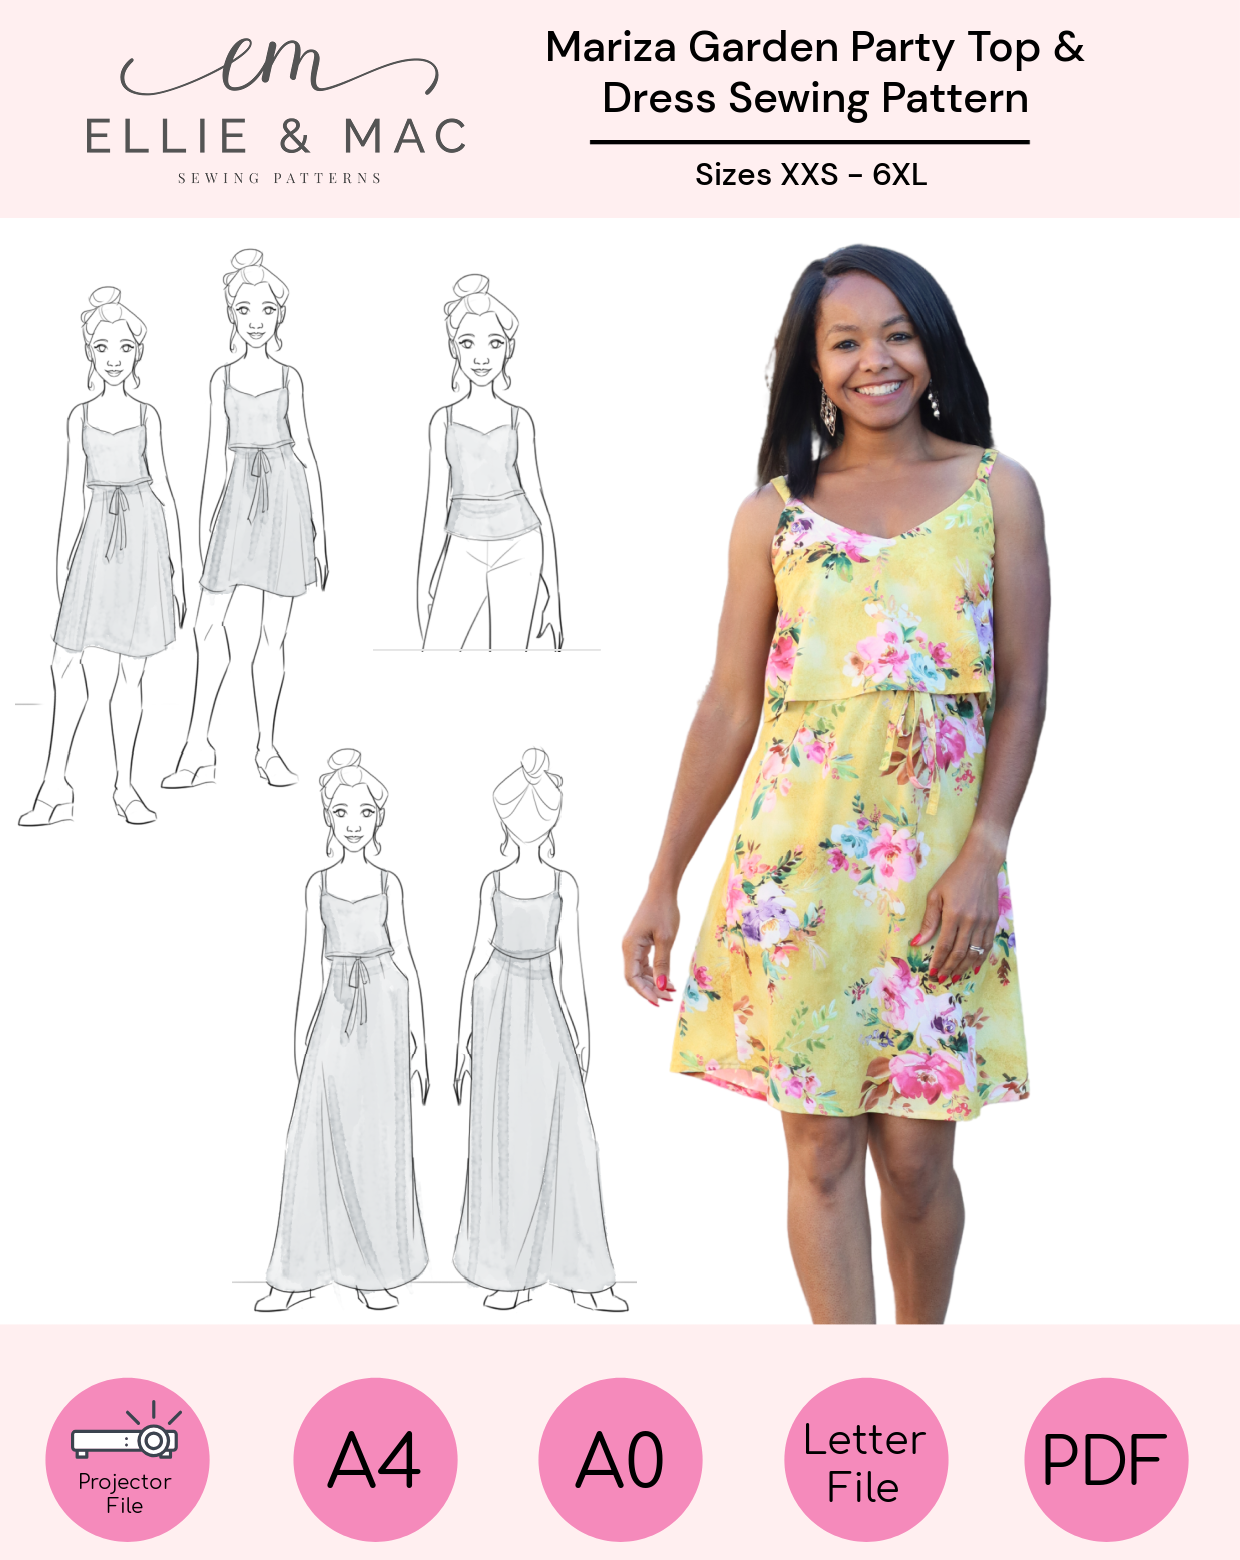 Woven Garden Party Dress PDF Sewing Pattern by Ellie and Mac Sewing Patterns